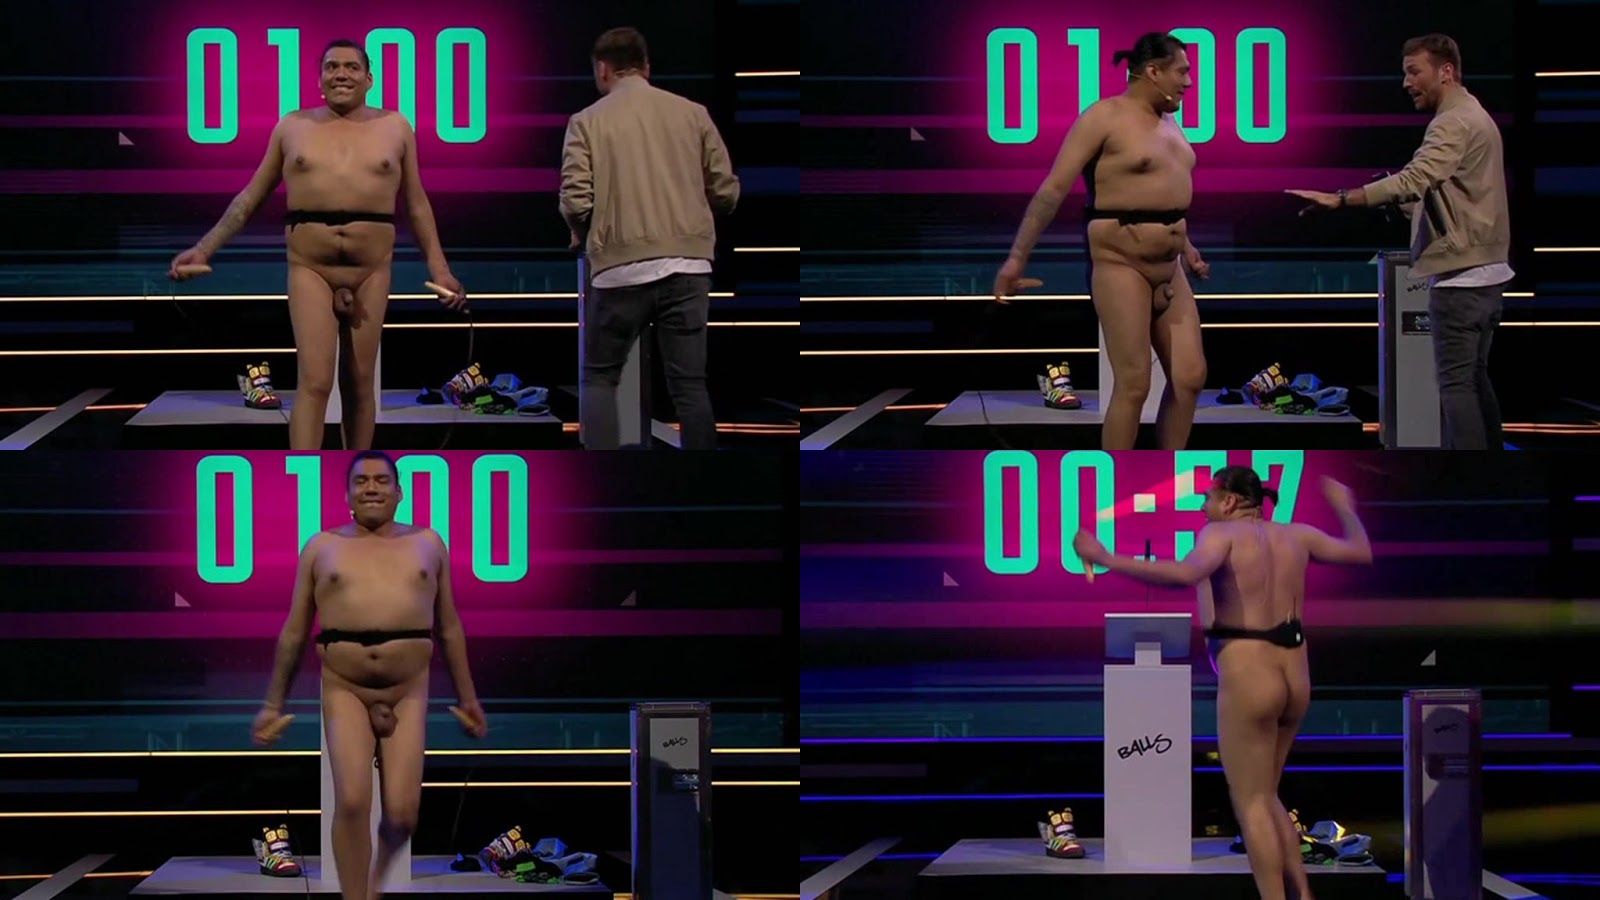 Nudity on live television